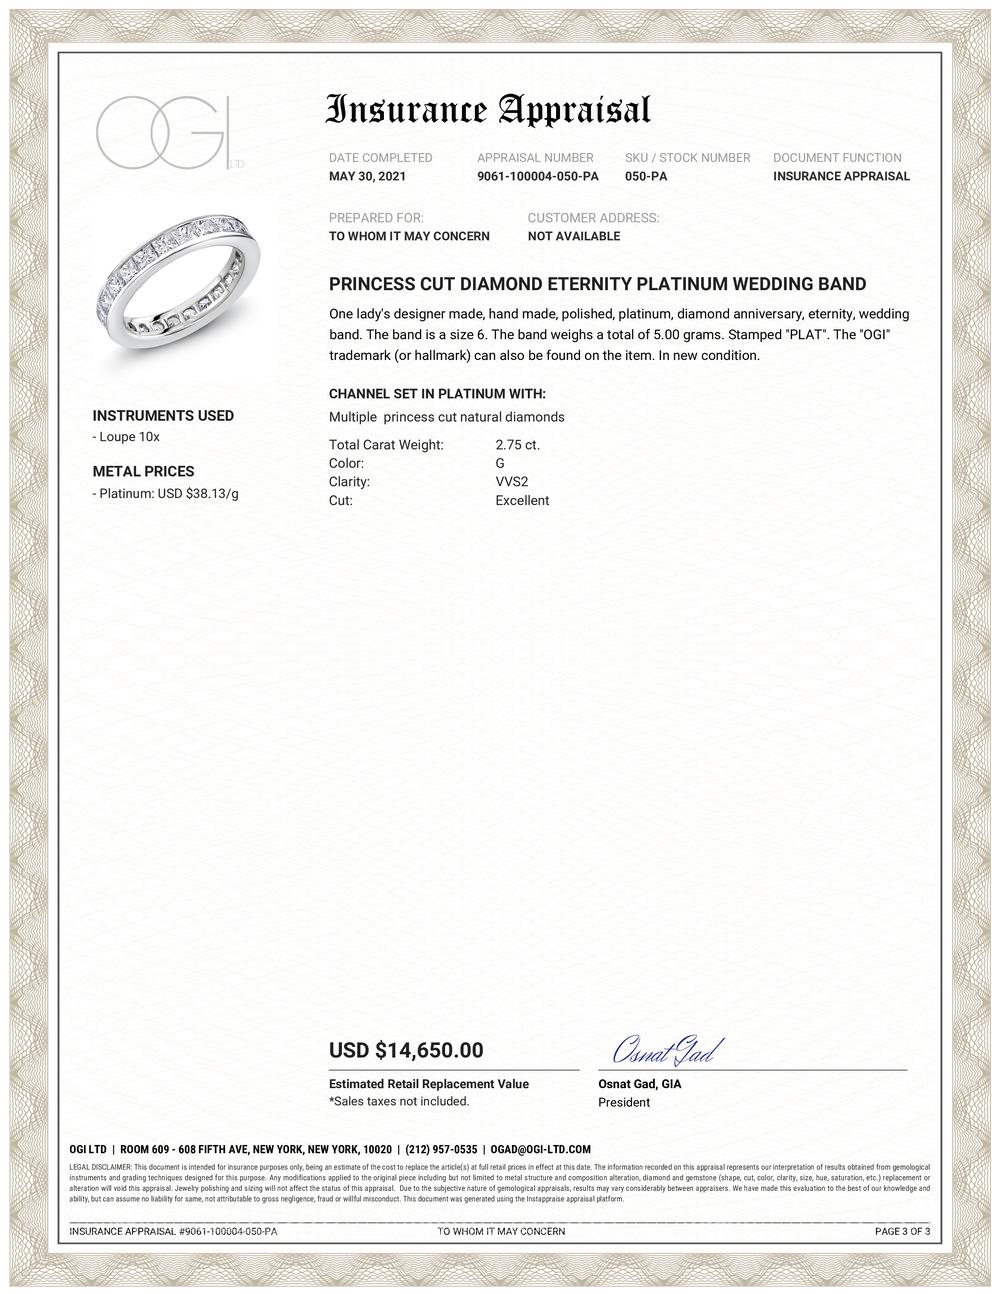 Princess cut diamond platinum channel set eternity wedding or anniversary ring 
Princess cut diamond weighing 2.75 carat 
Width 3.5mm
New ring 
Diamond quality G VS 
Ring size 6 In Stock
The ring cannot be sized
Handmade in the USA
